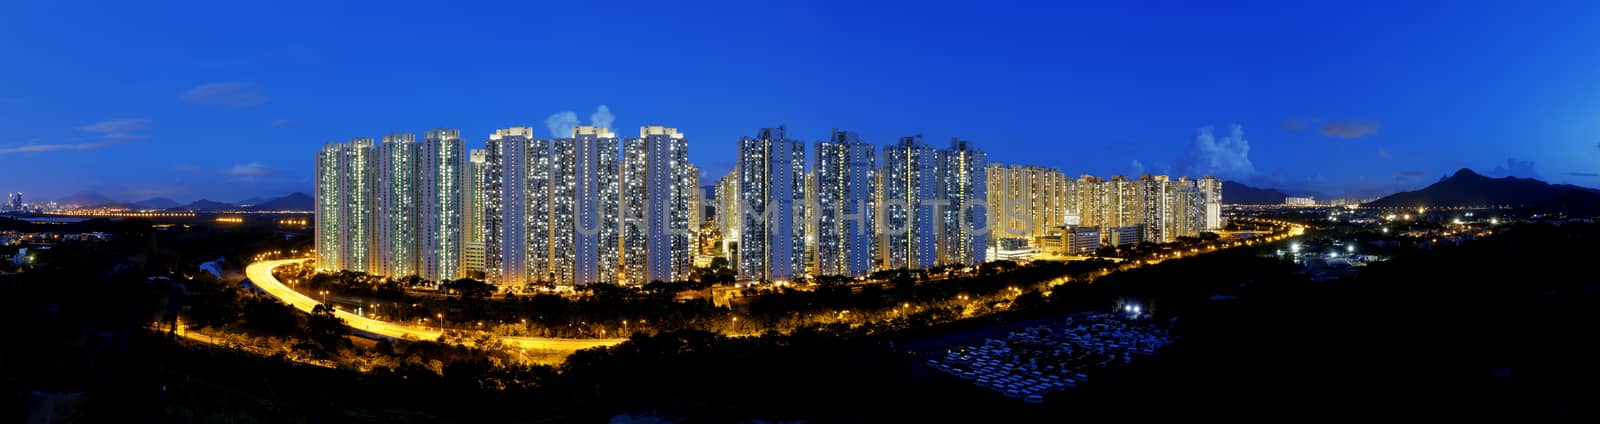 Public Estate in Hong Kong  by cozyta